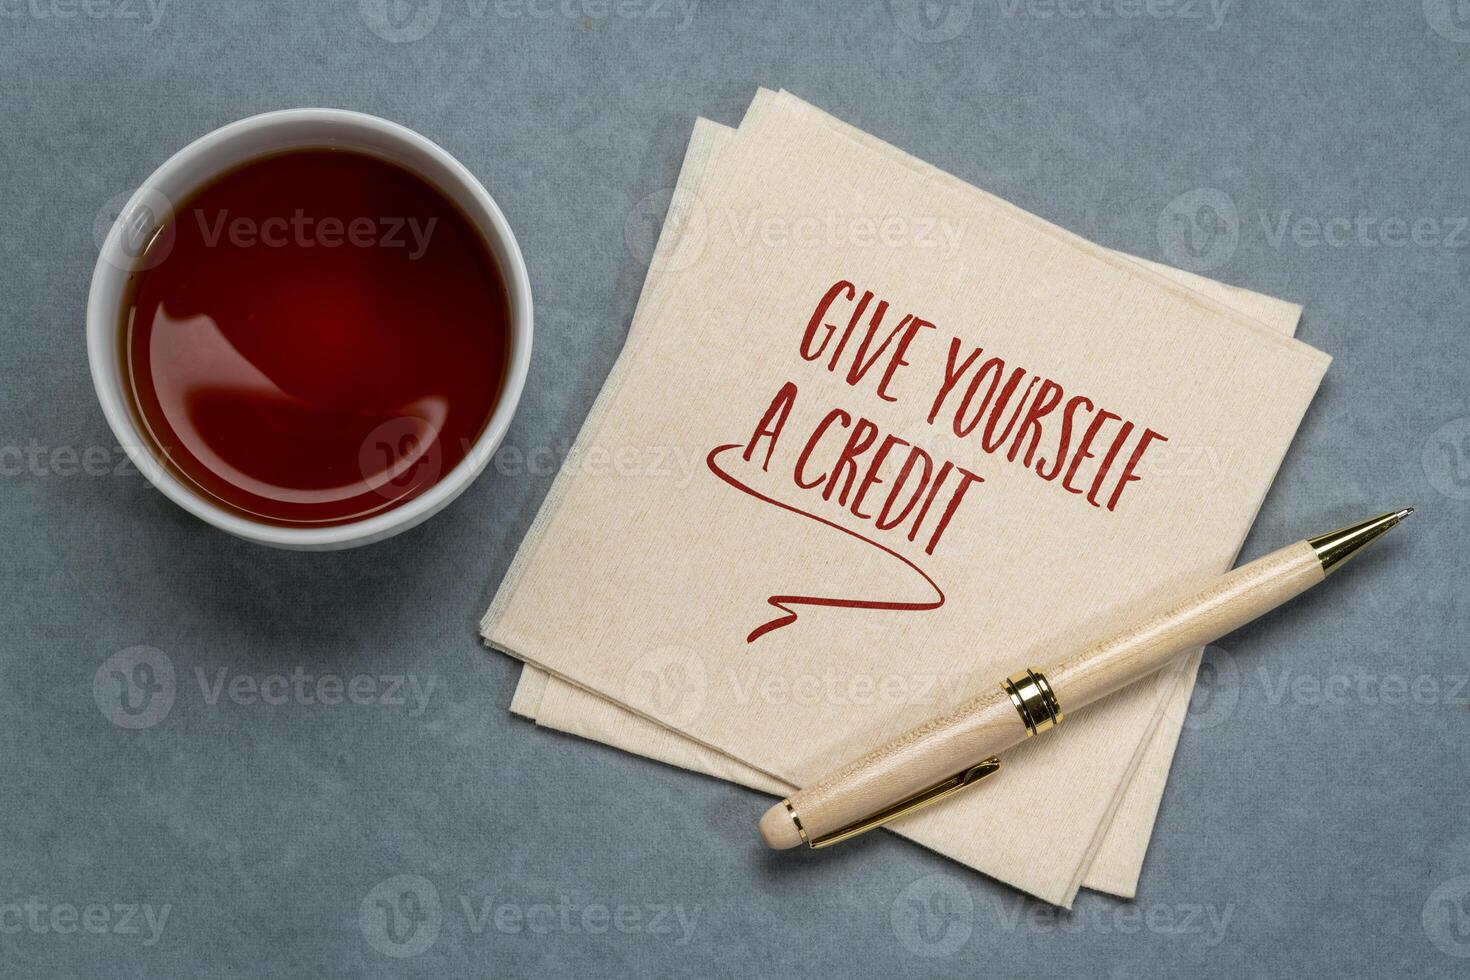 give yourself a credit, inspirational note on napkin, personal development concept photo